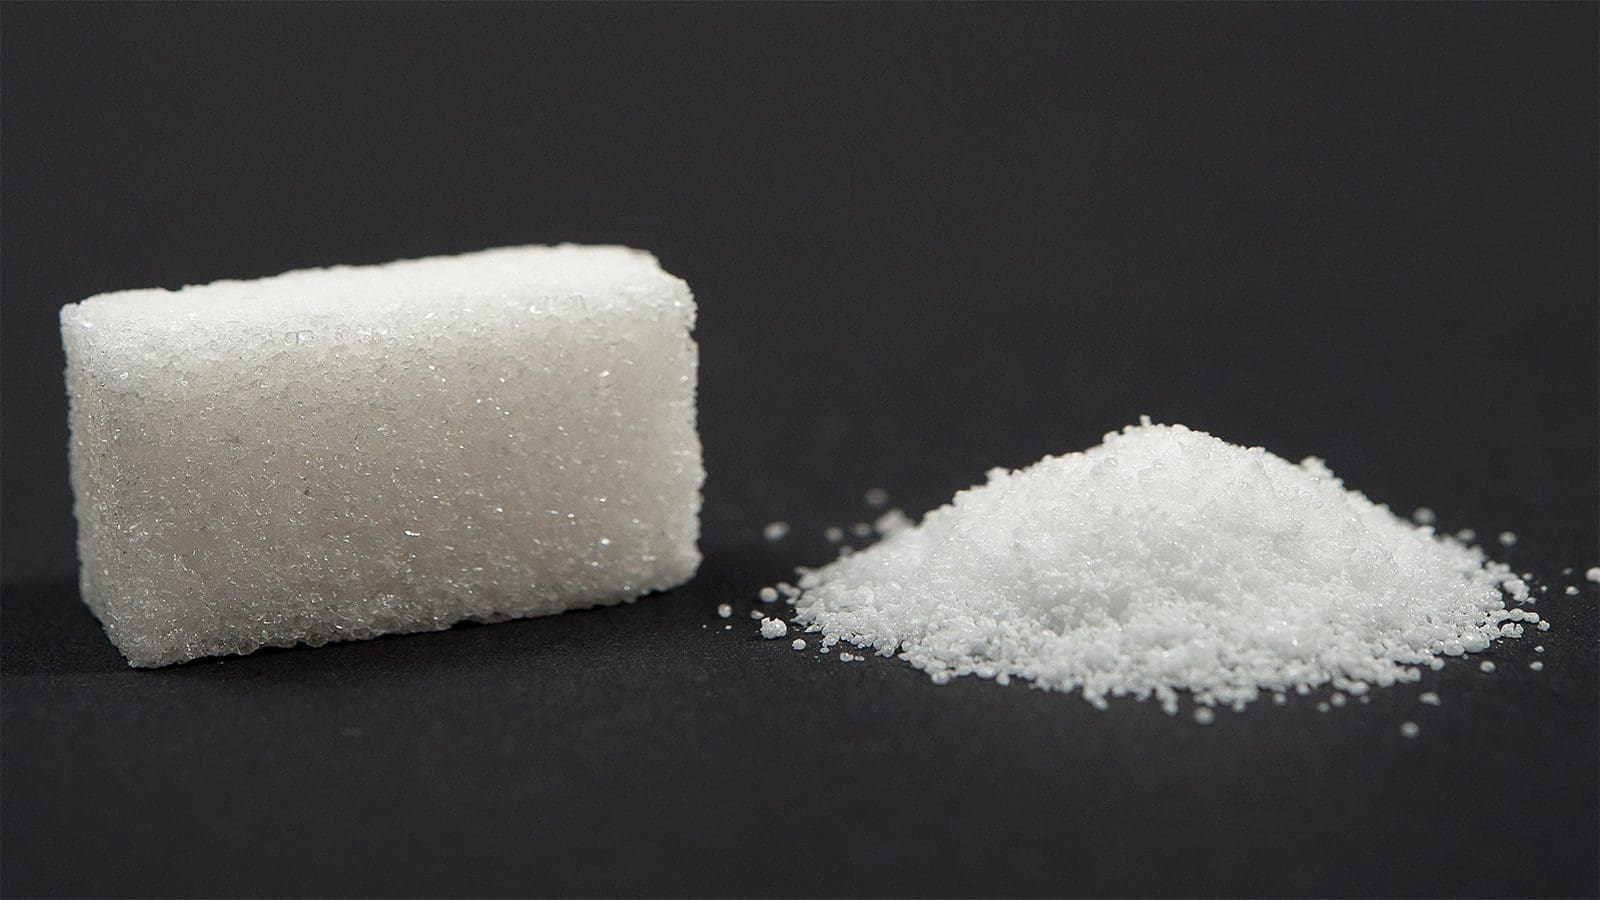 Aspartame declared “possibly carcinogenic” by WHO’s IARC, but disputed by FDA and industry